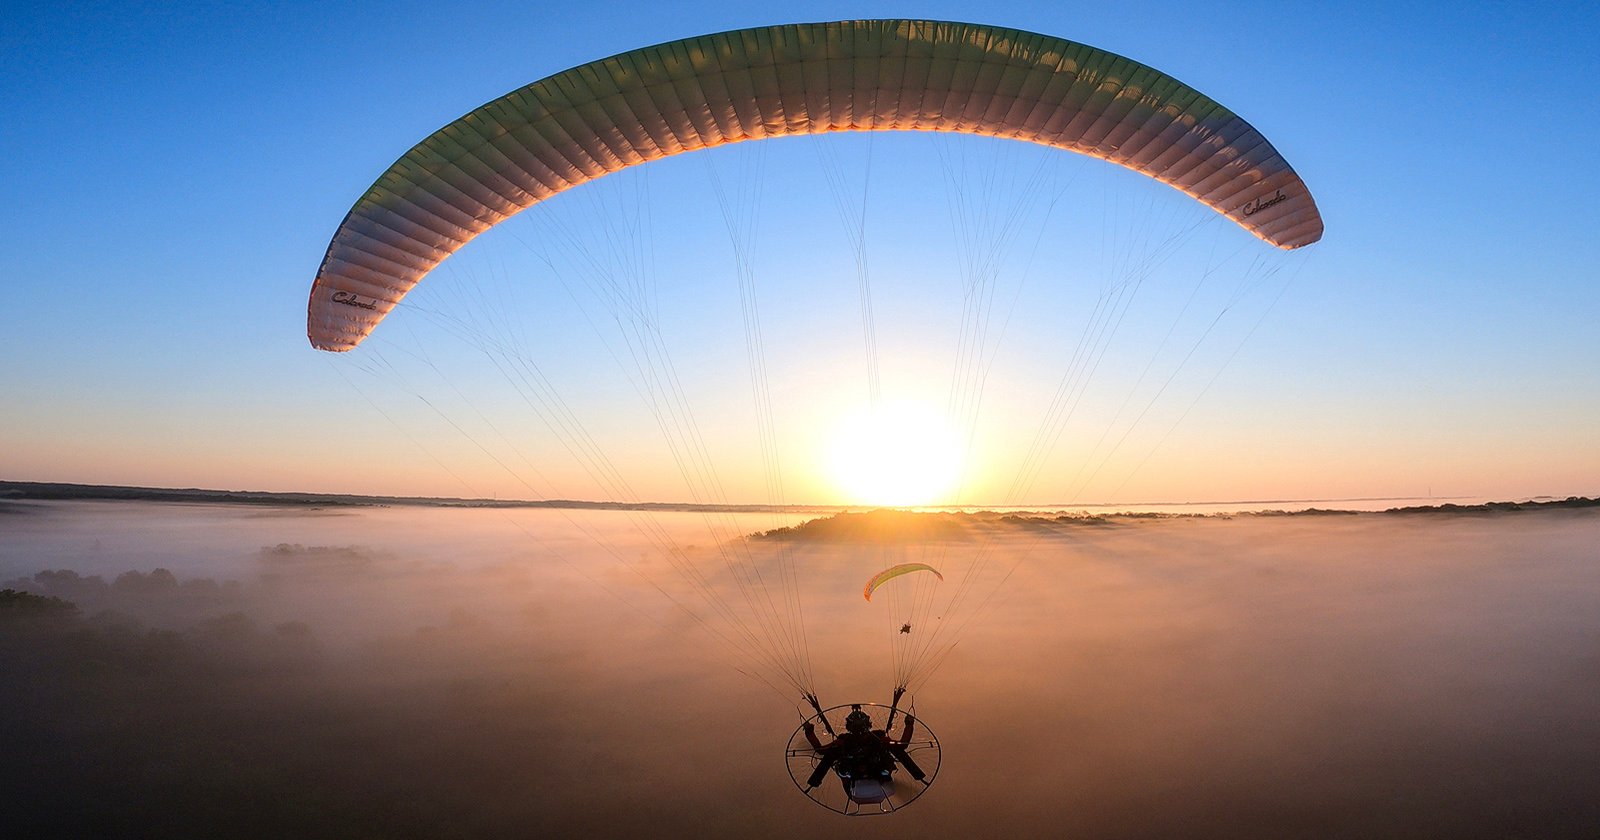 Paragliding: Learn to Fly! on Vimeo